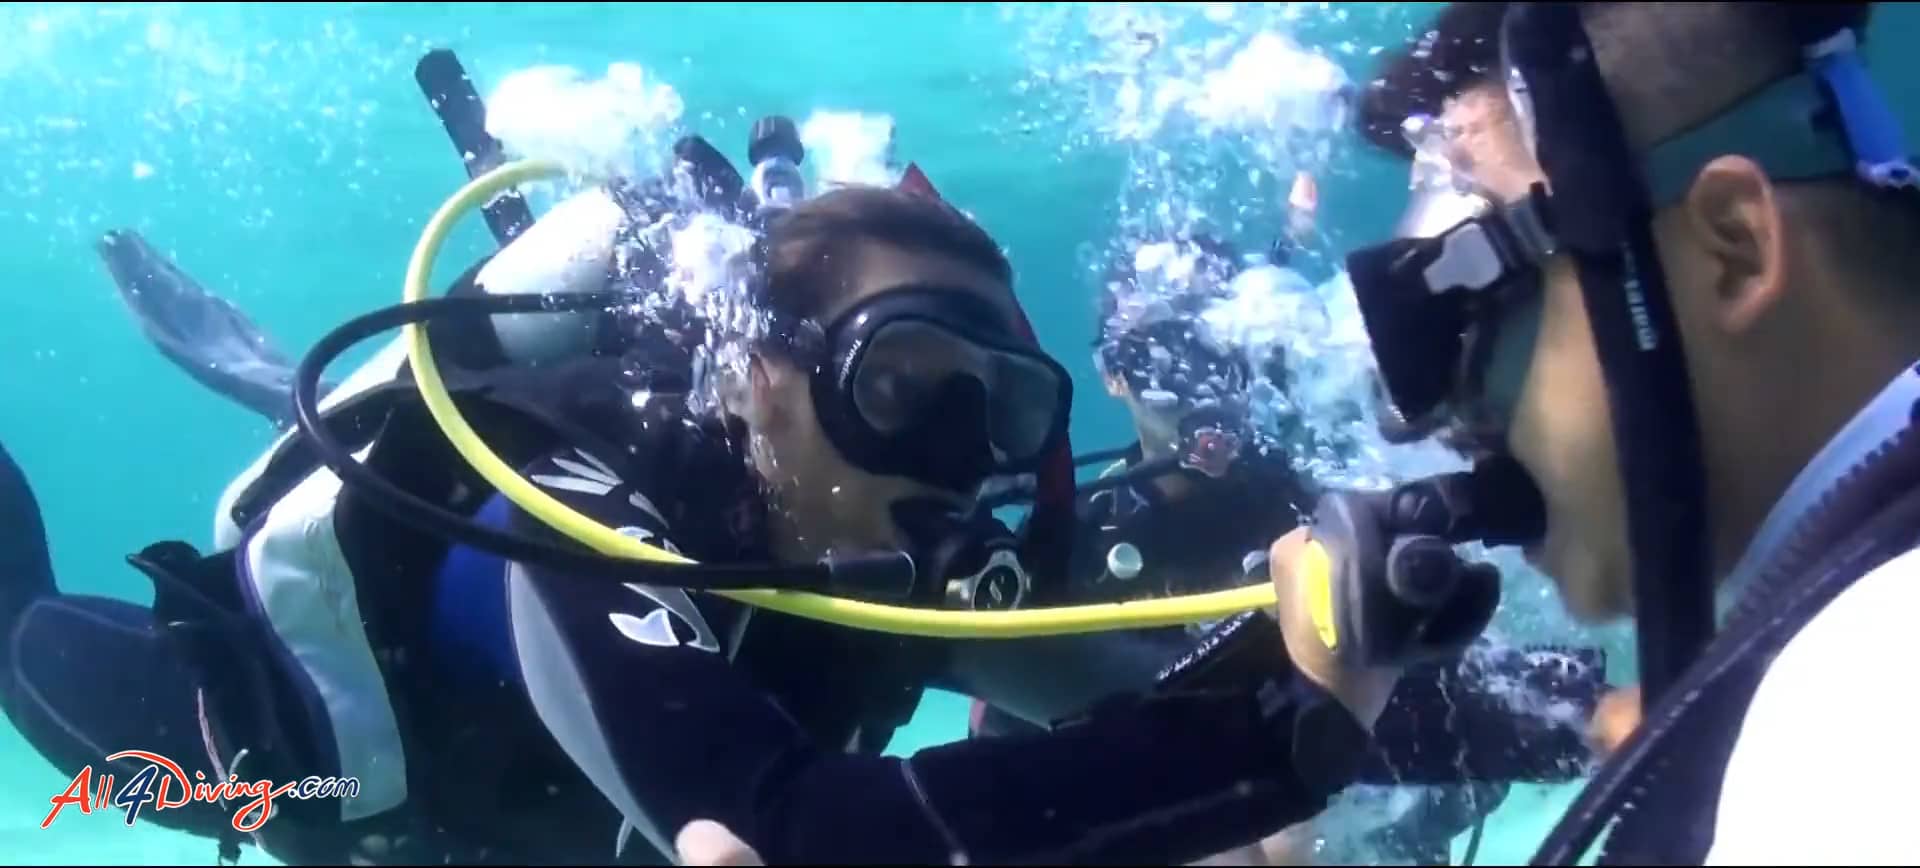 Rescue Diver Course with All4Diving on Vimeo